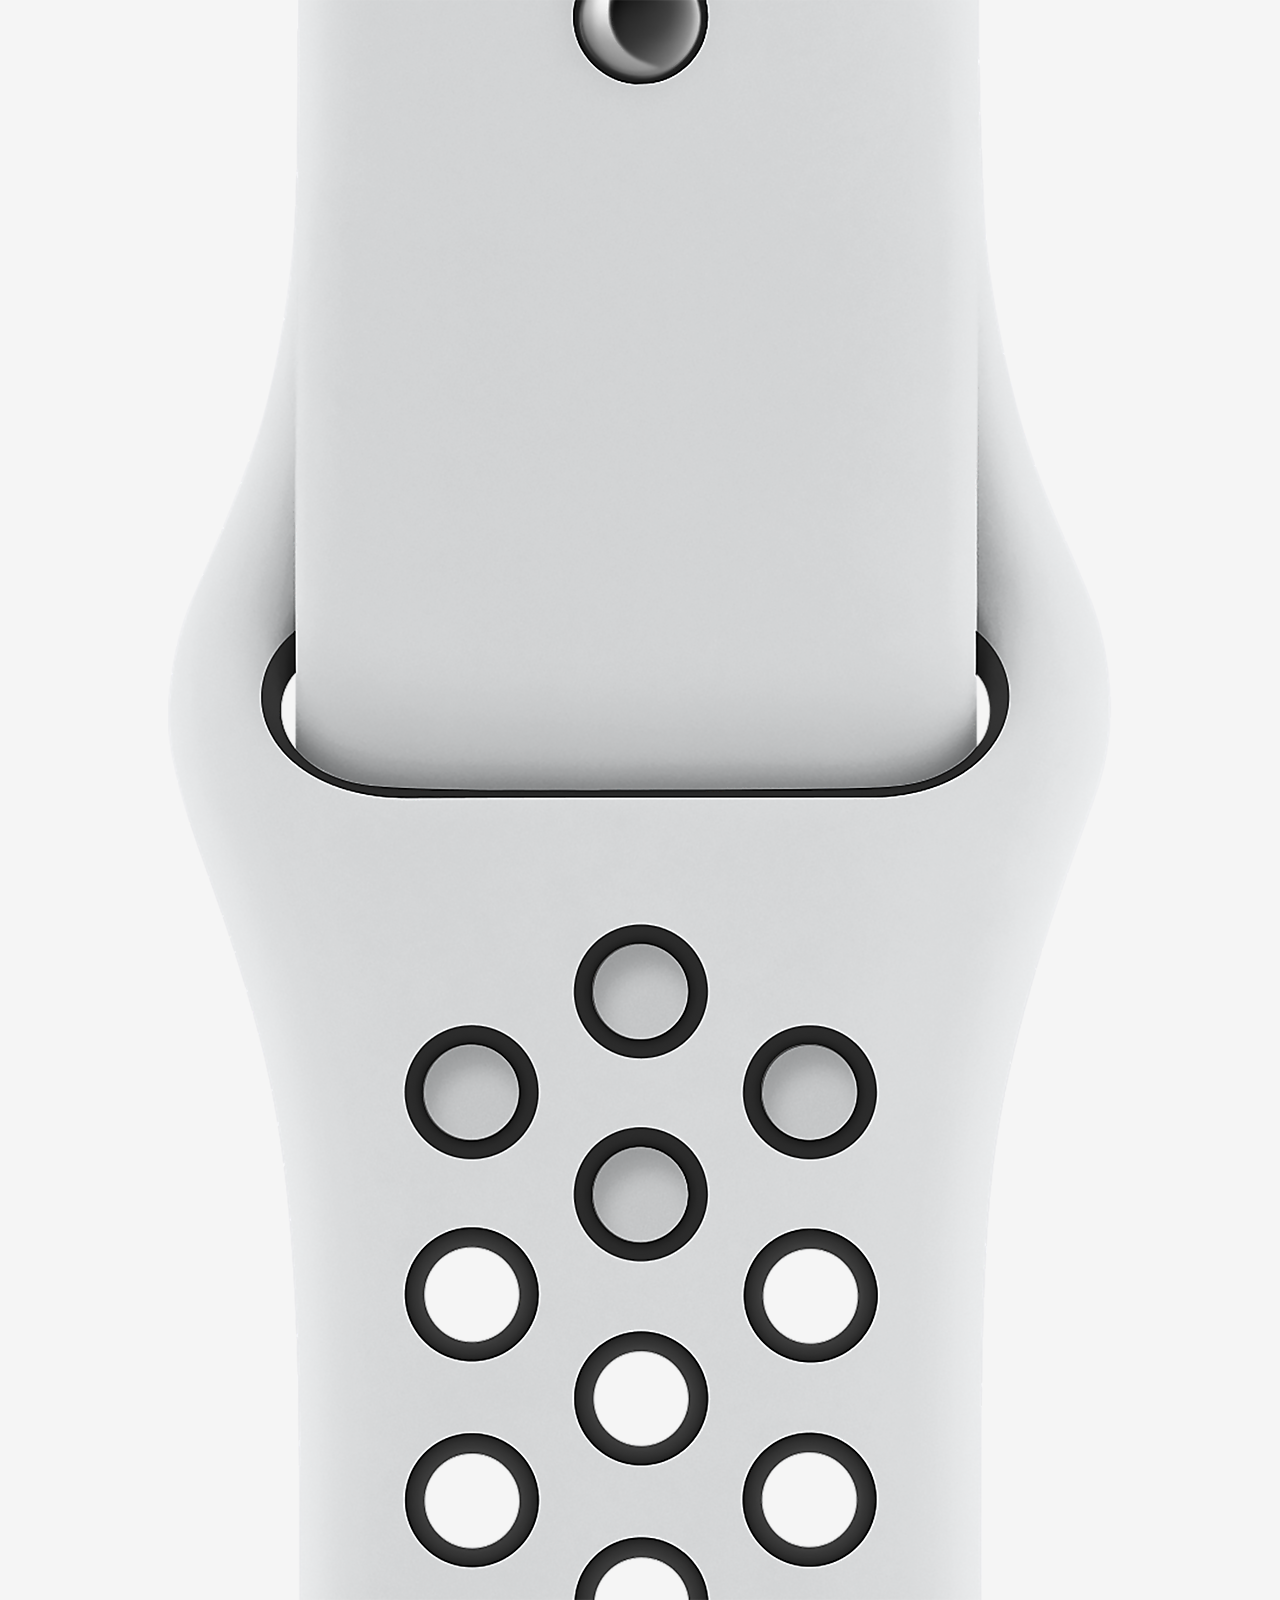 apple watch nike se (gps + cellular) with nike sport band